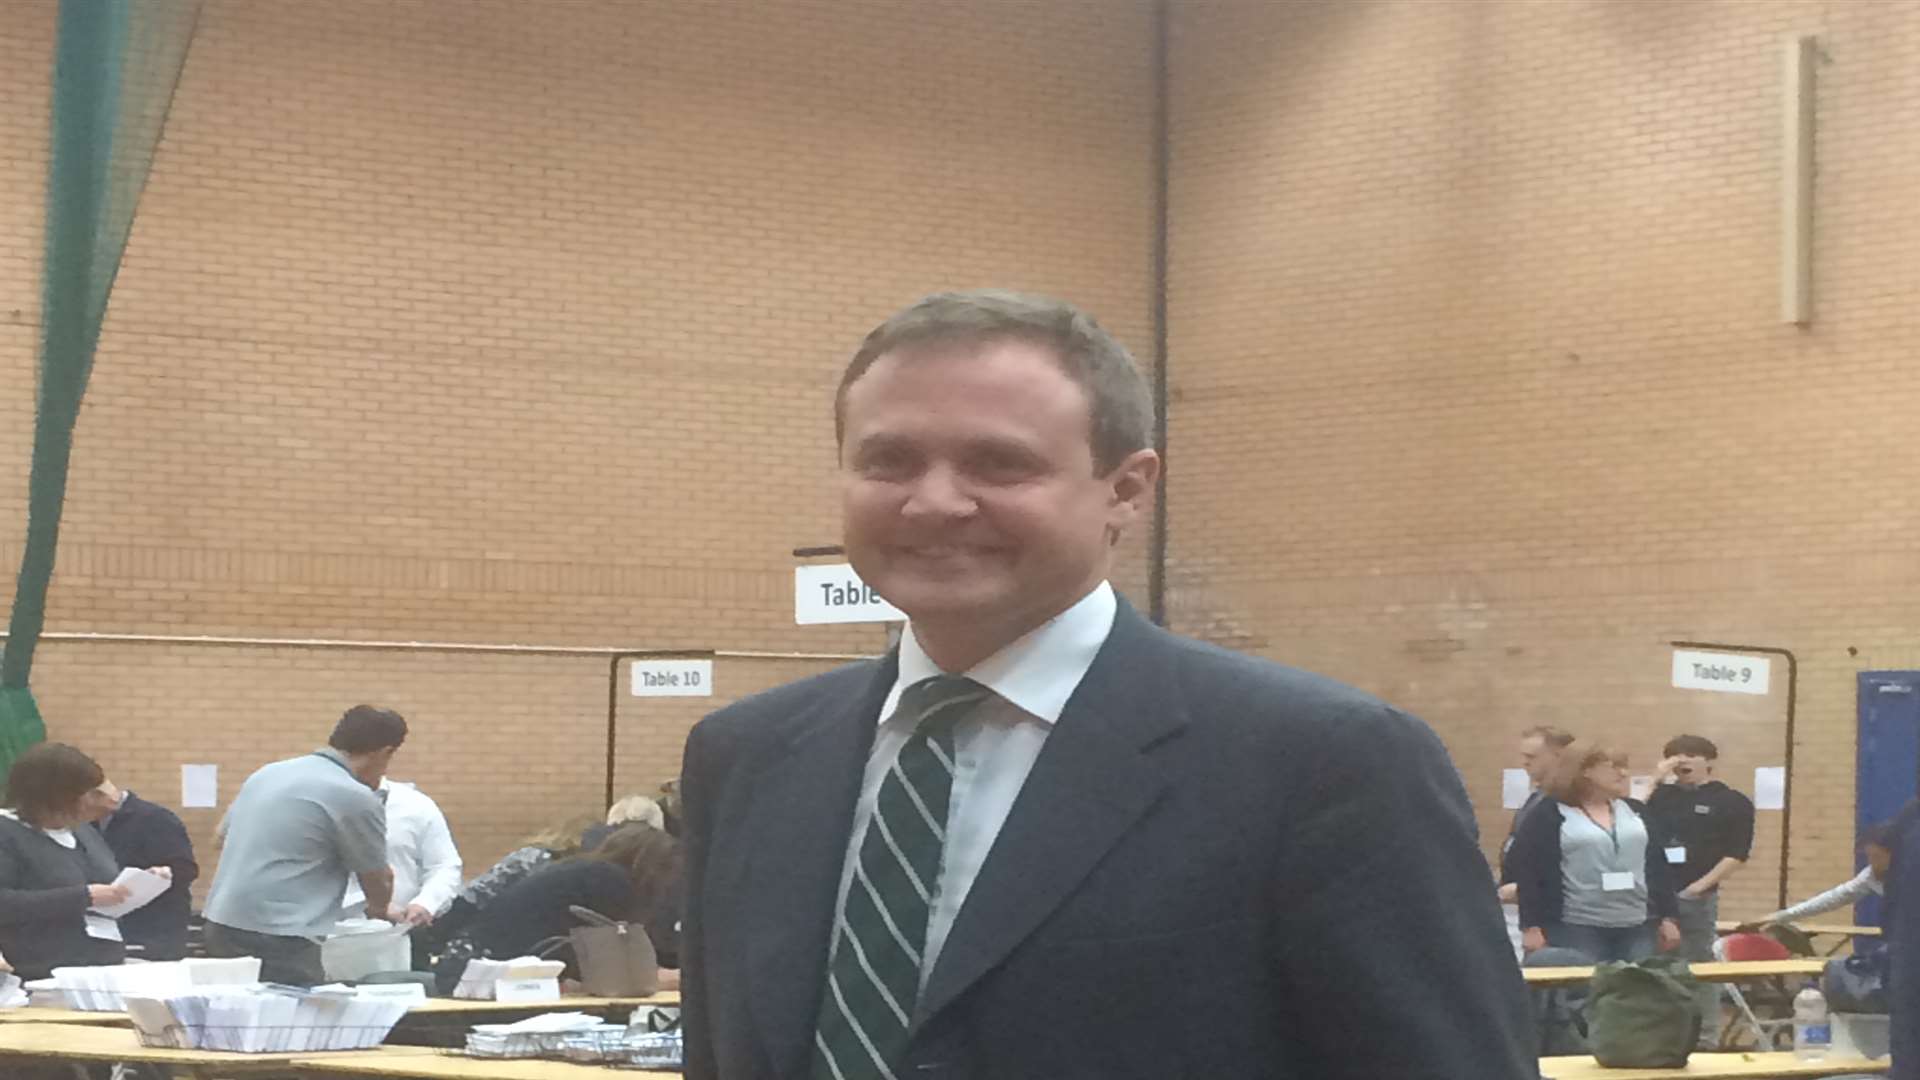 Tom Tugendhat has been elected as the Conservative MP for Tonbridge and Malling